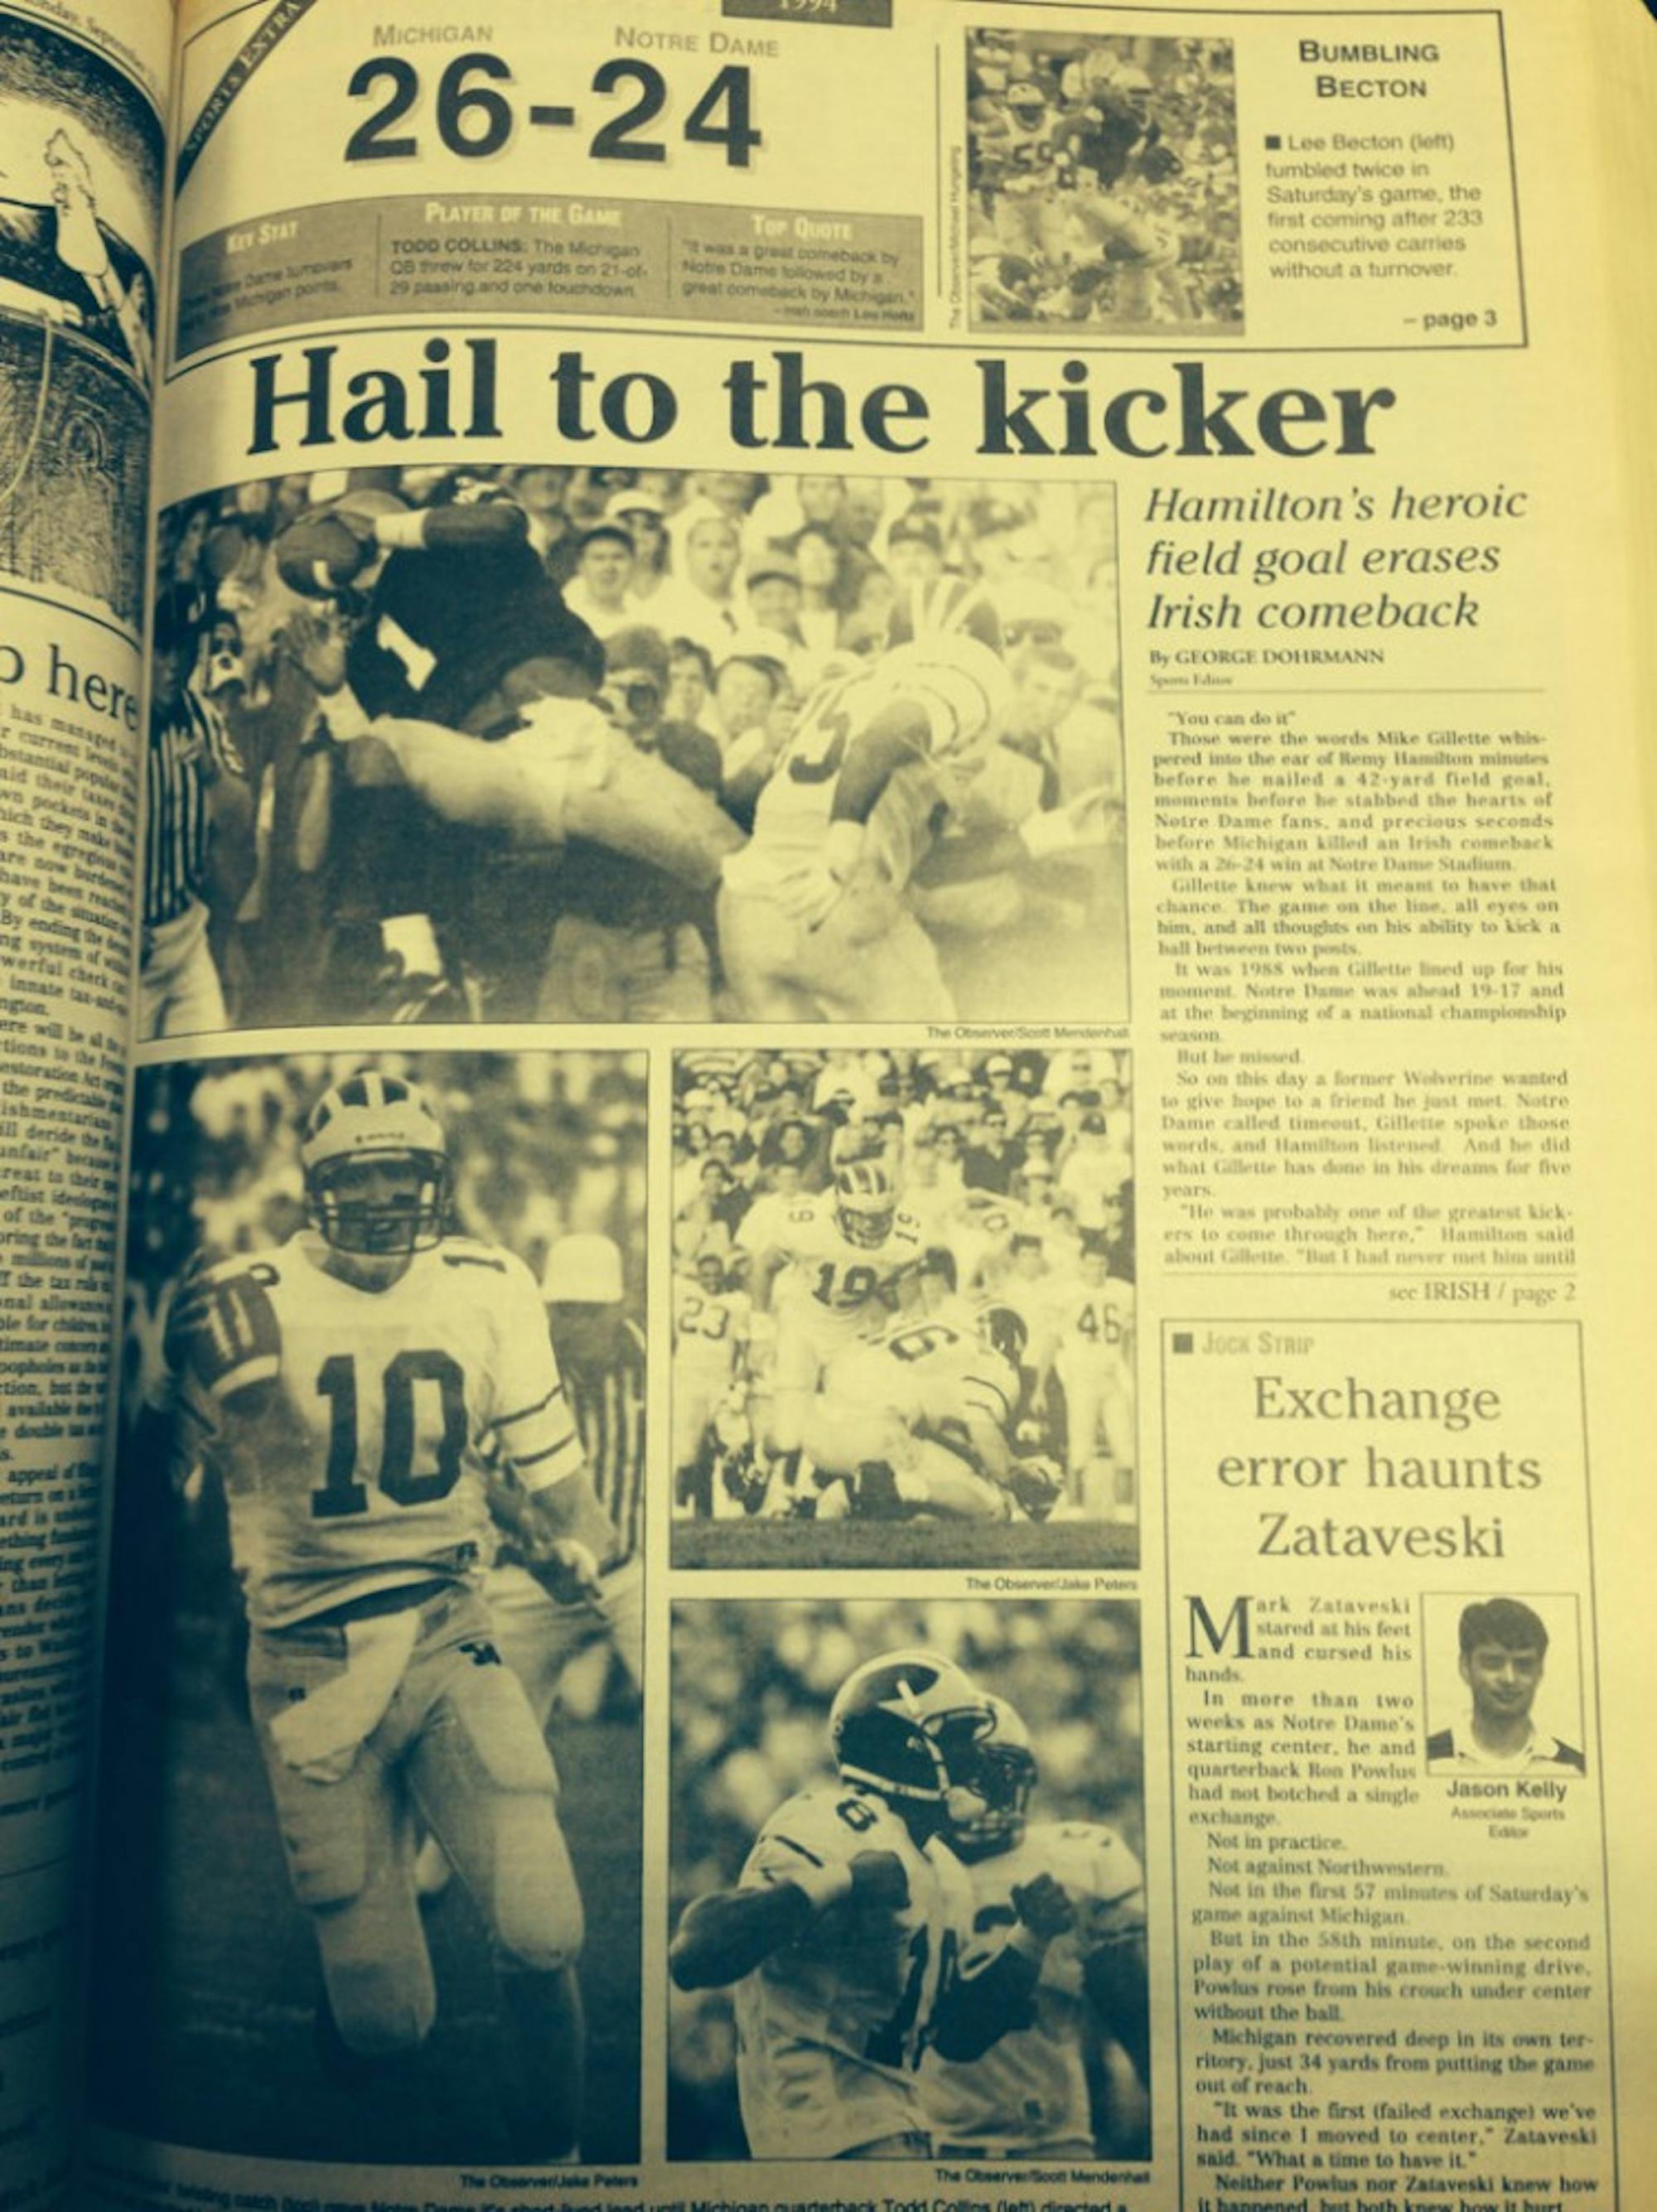 The Observer from Sept. 12, 1994.